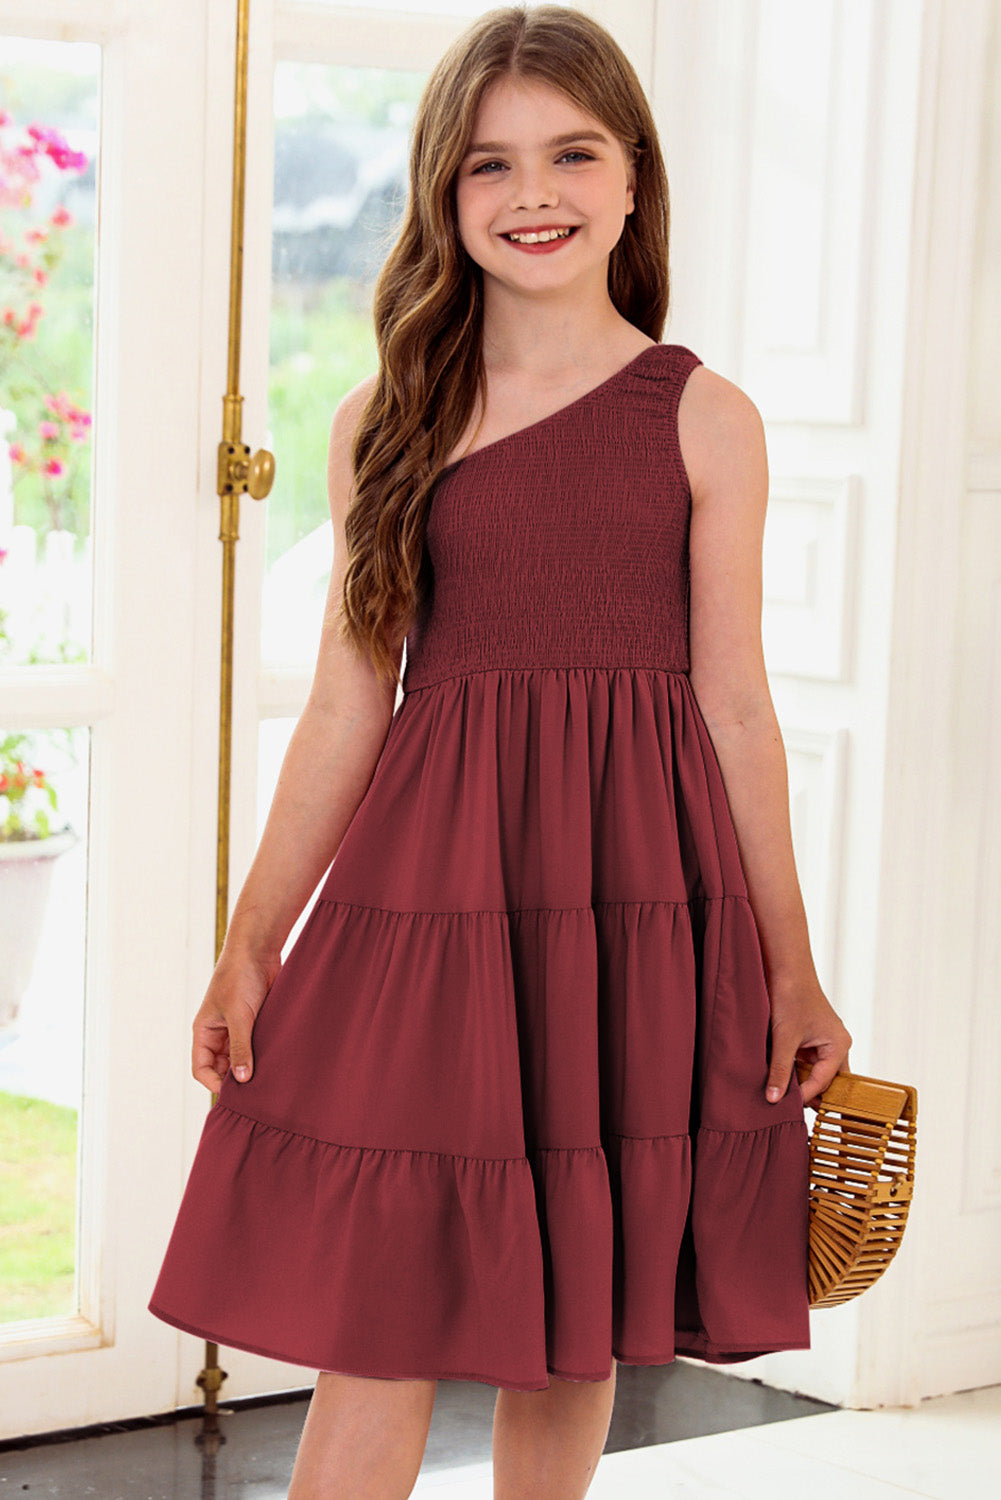 Fashionable One-Shoulder Tiered Dress